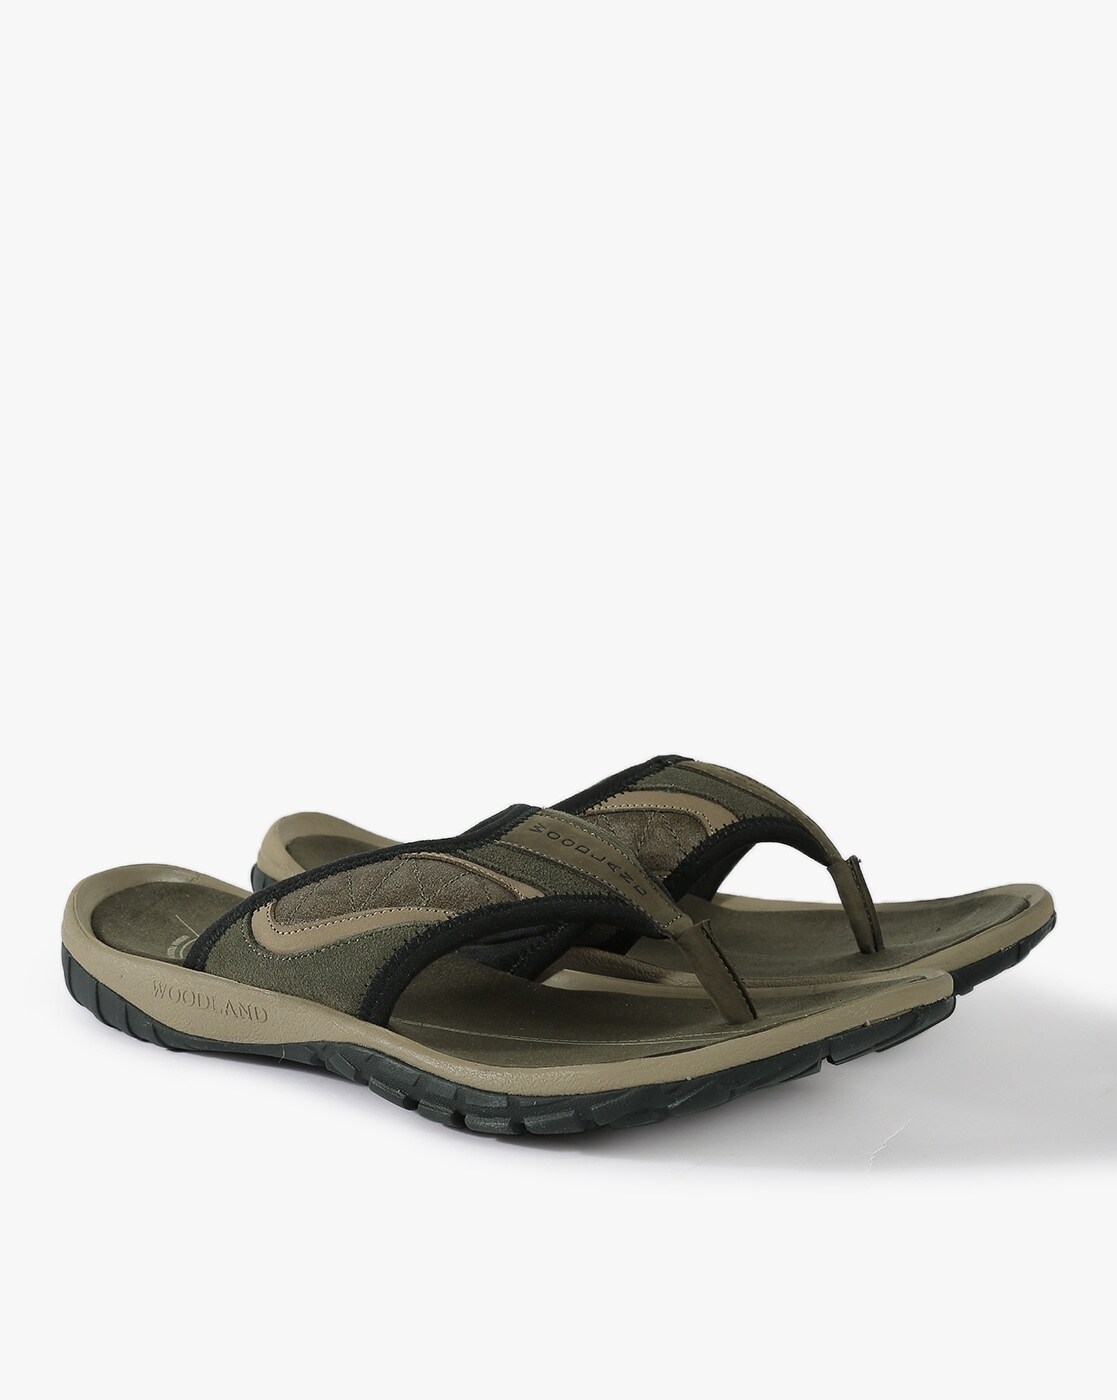 Buy Green Sandals for Men by WOODLAND 